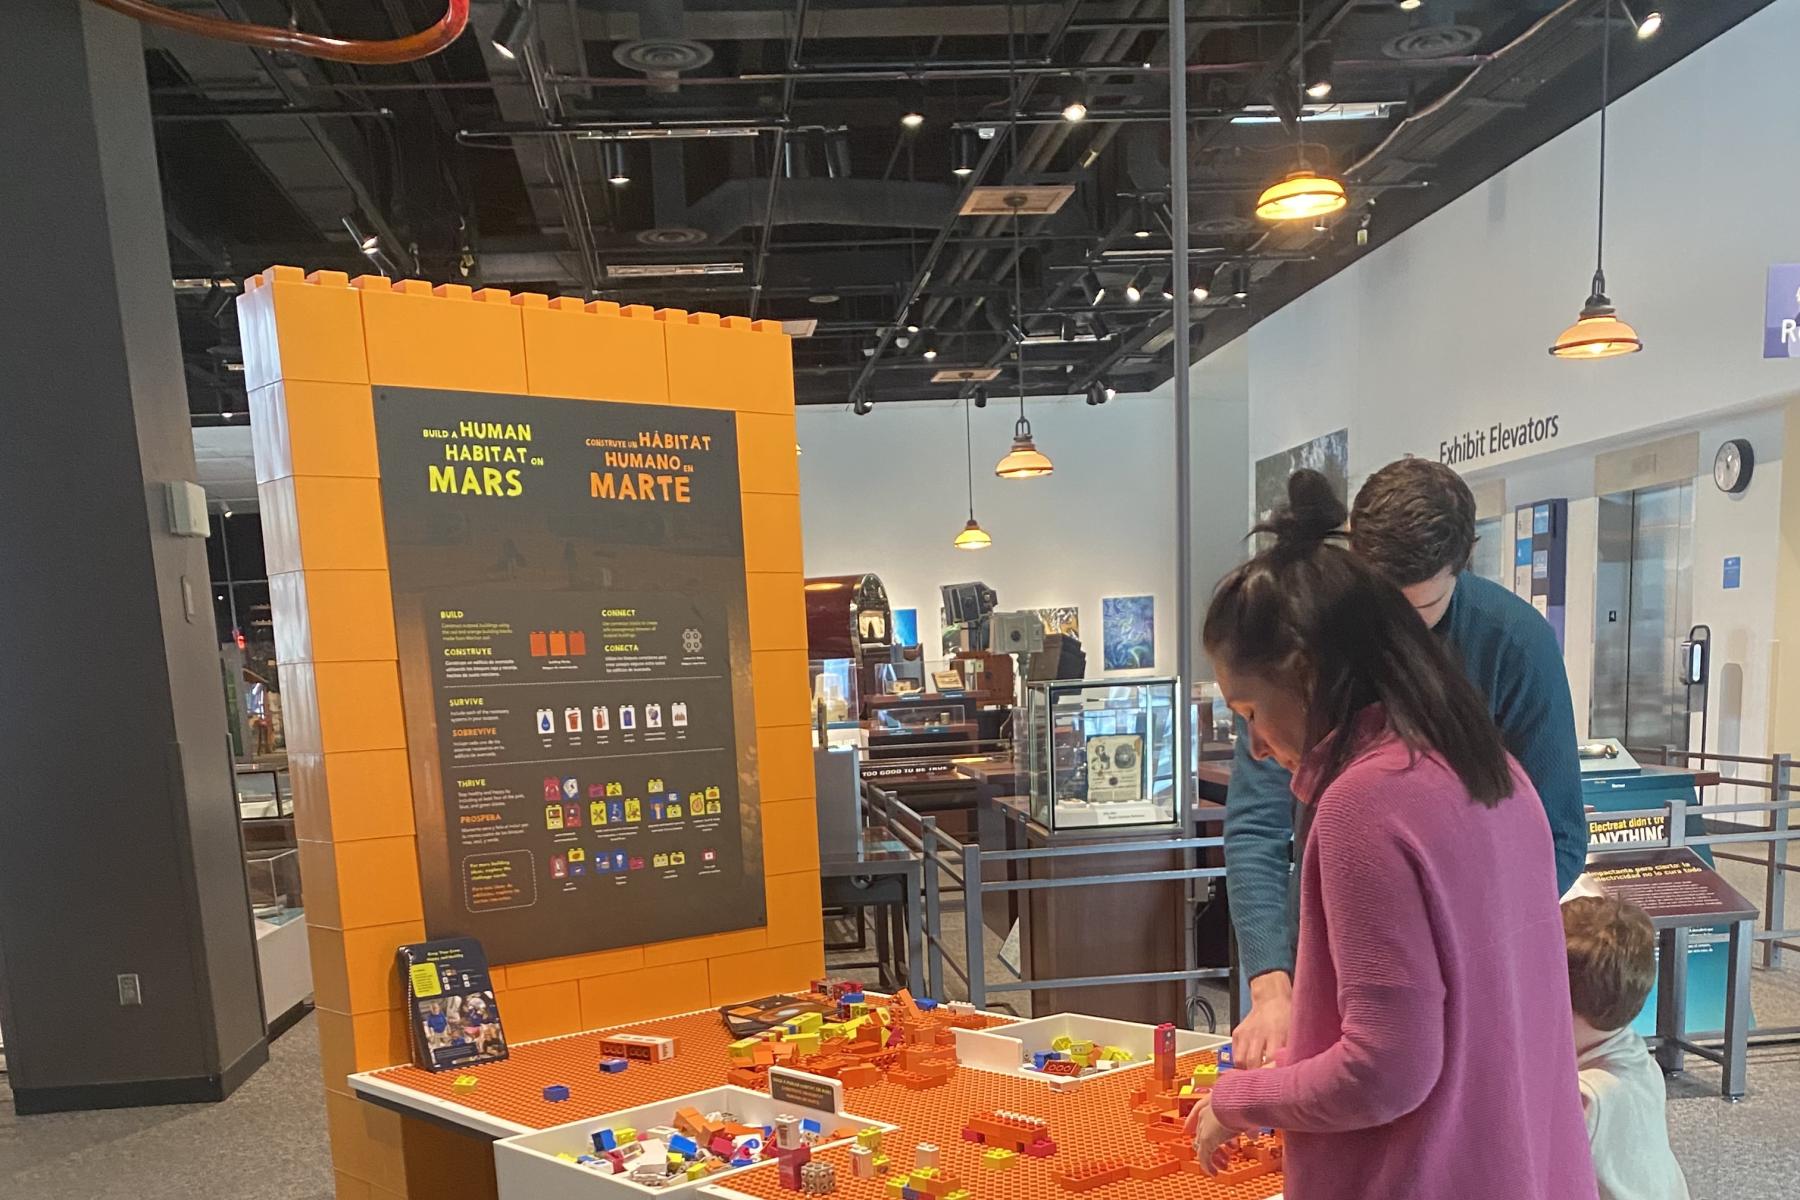 Build a Human Habitat on Mars exhibit with instruction graphics, table top building surface, and guests building with blocks - Table view